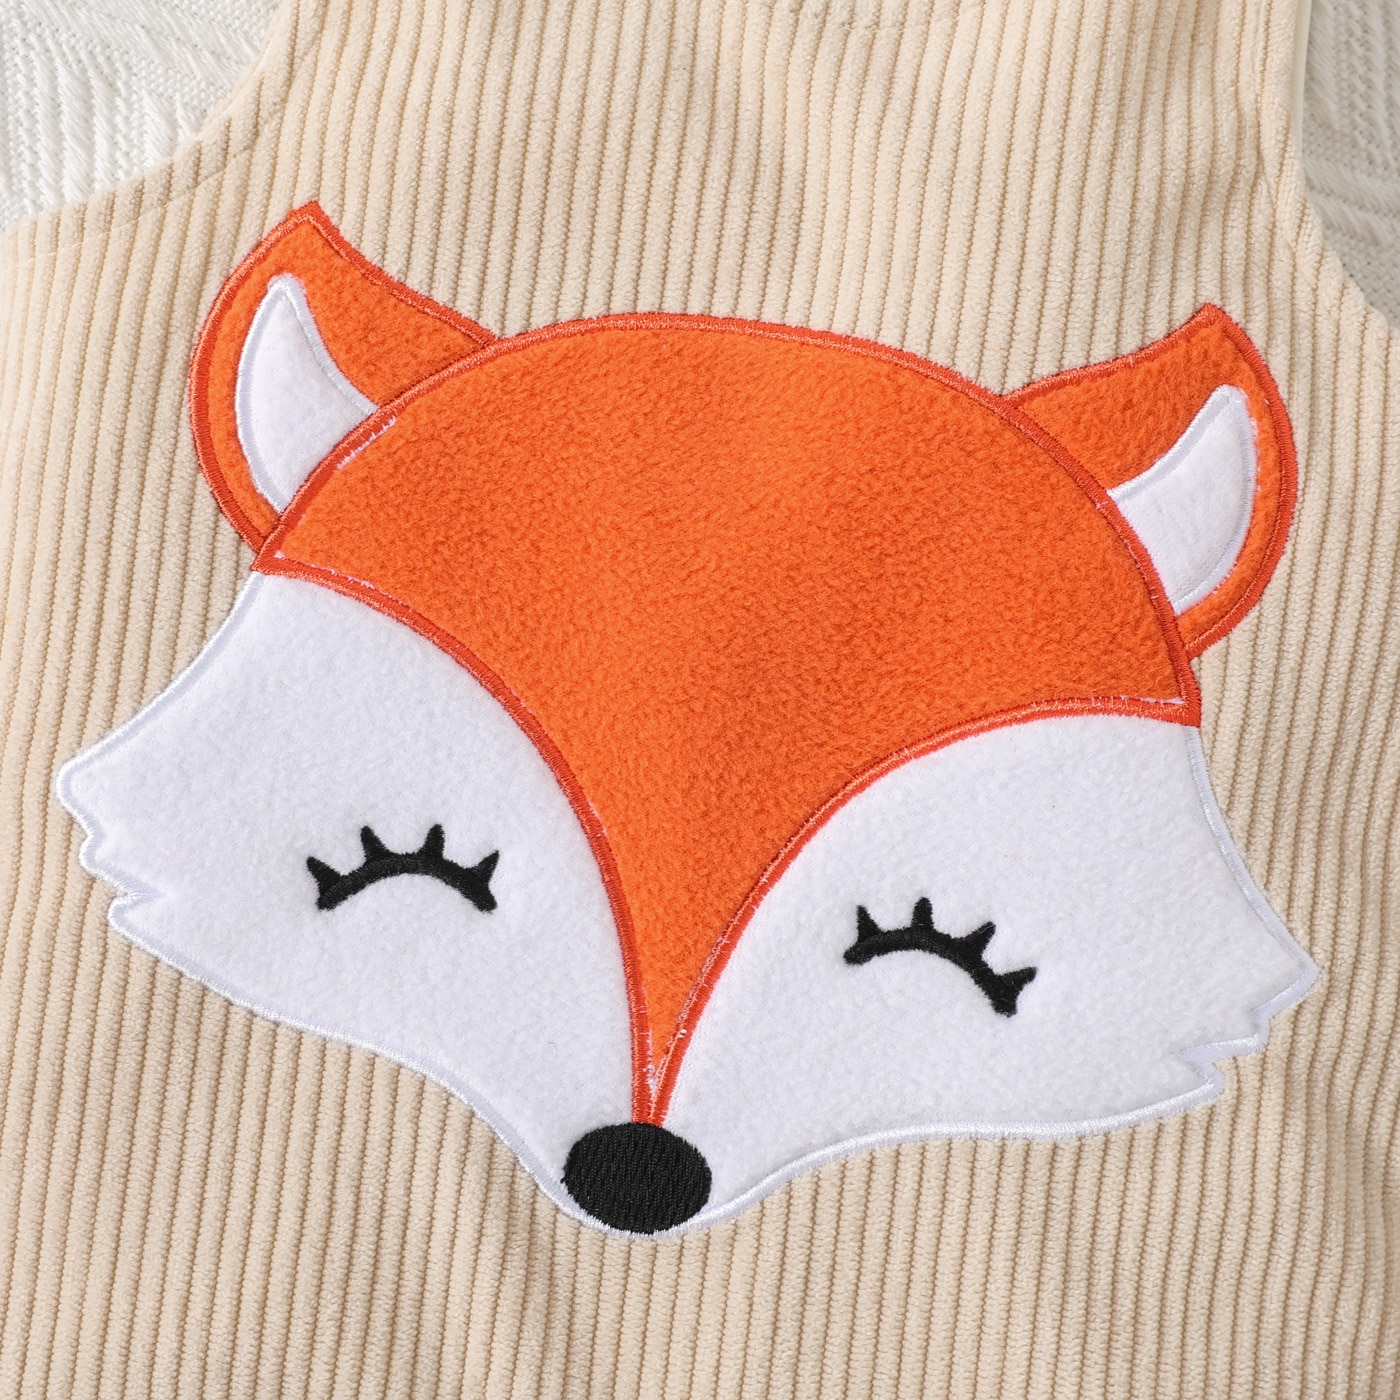 PatPat-Newborn-Baby-Boy-Clothes-New-Born-Babies-Costume-Overalls-Jumpsuits-Cartoon-Fox-Embroidered-Corduroy-Rompers-4